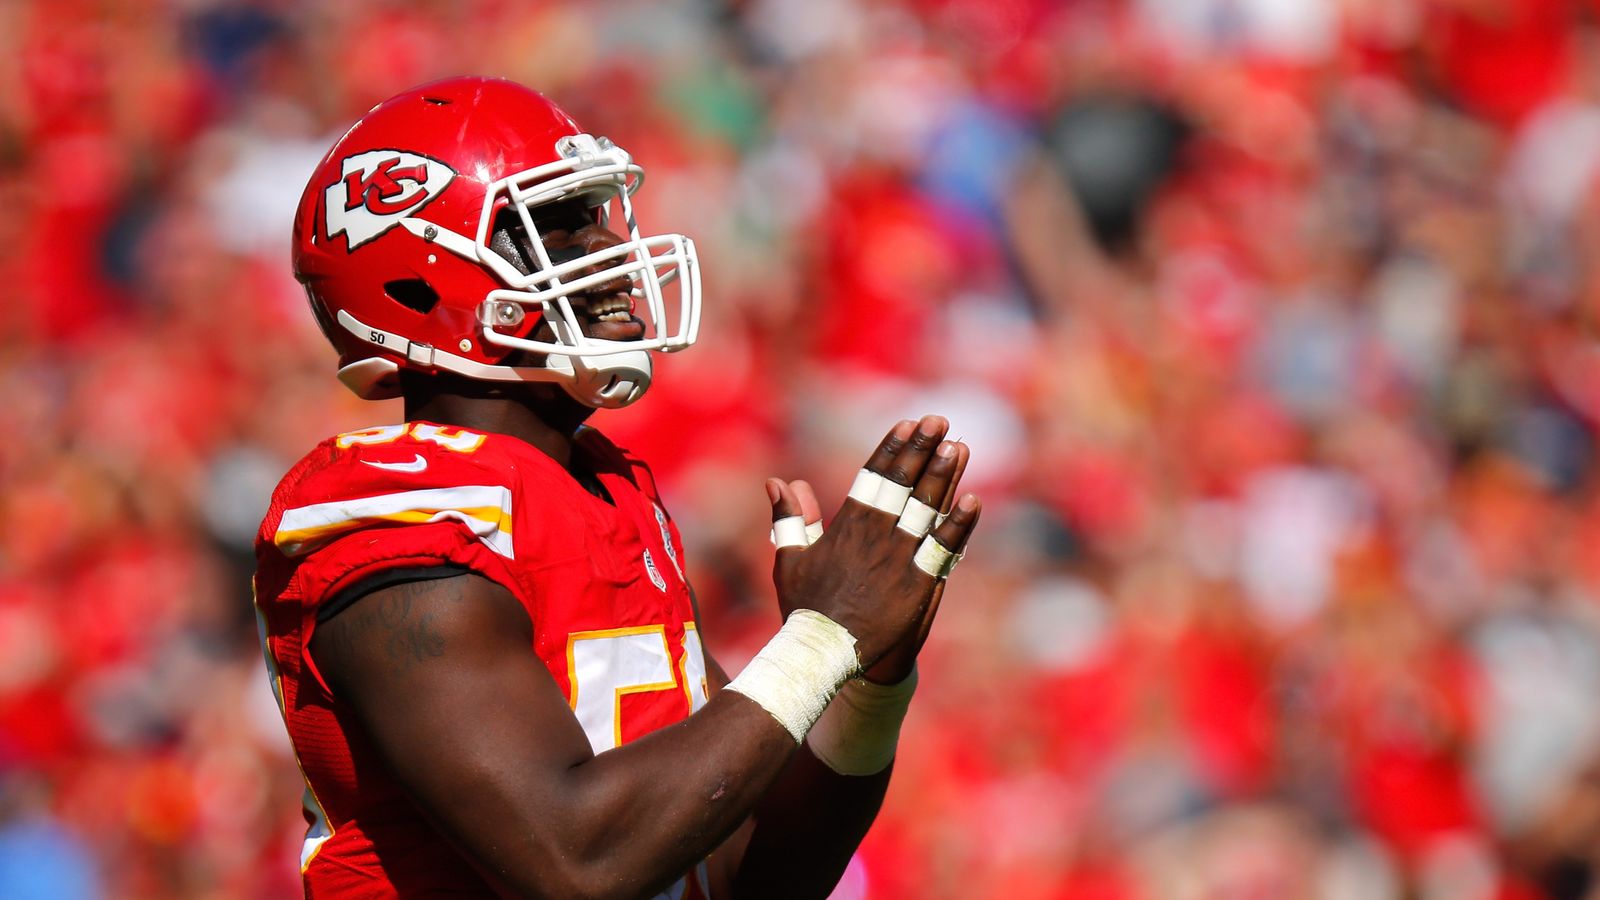 Kansas City Chiefs sign Justin Houston to six-year deal | NFL News